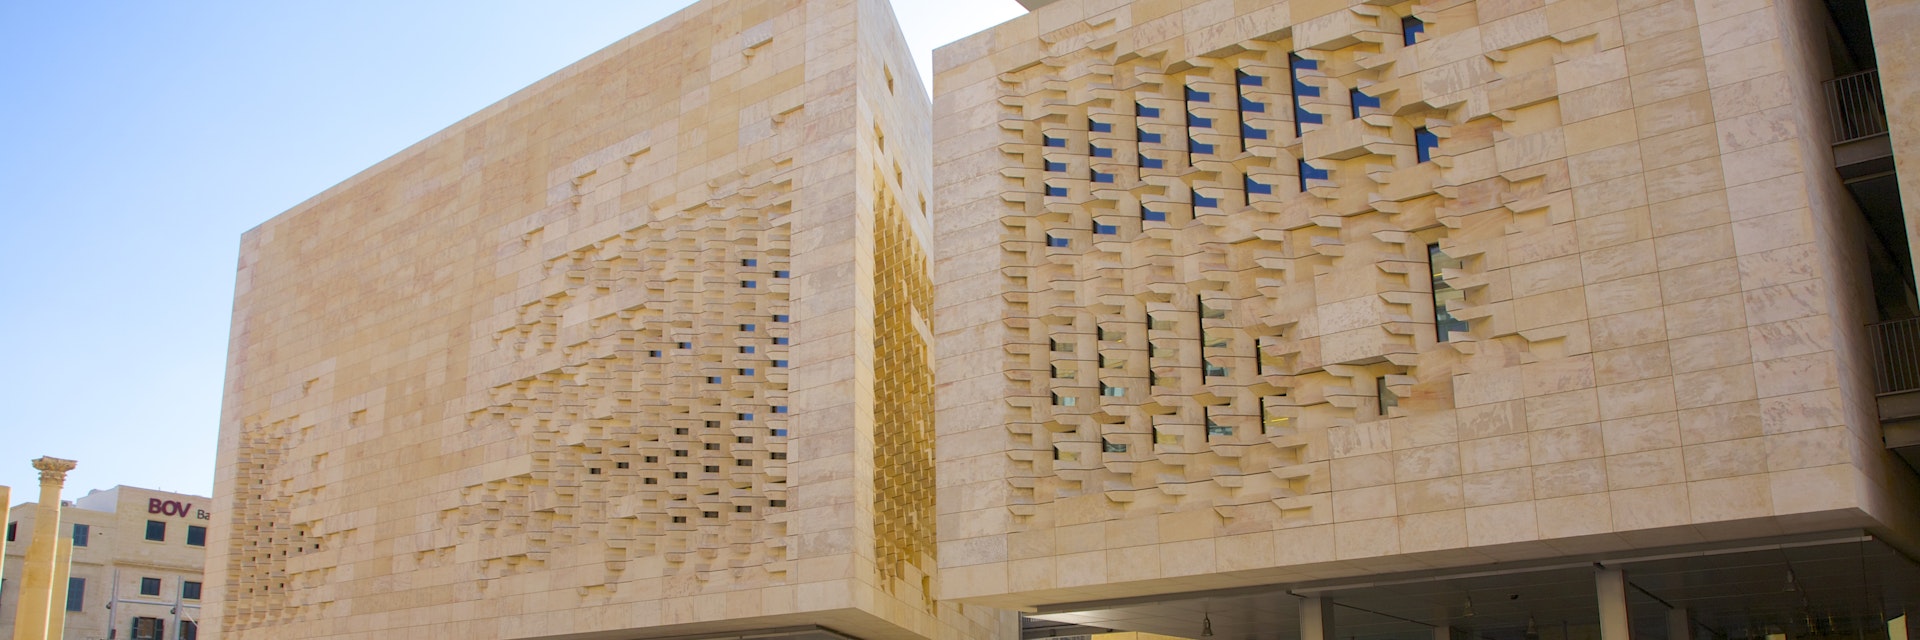 Modern stone and glass Parliament building near Valletta City Gate at entrance to Valletta, Malta.  Designed by architect Renzo Piano of Renzo Piano Building Workshop and completed in 2014.